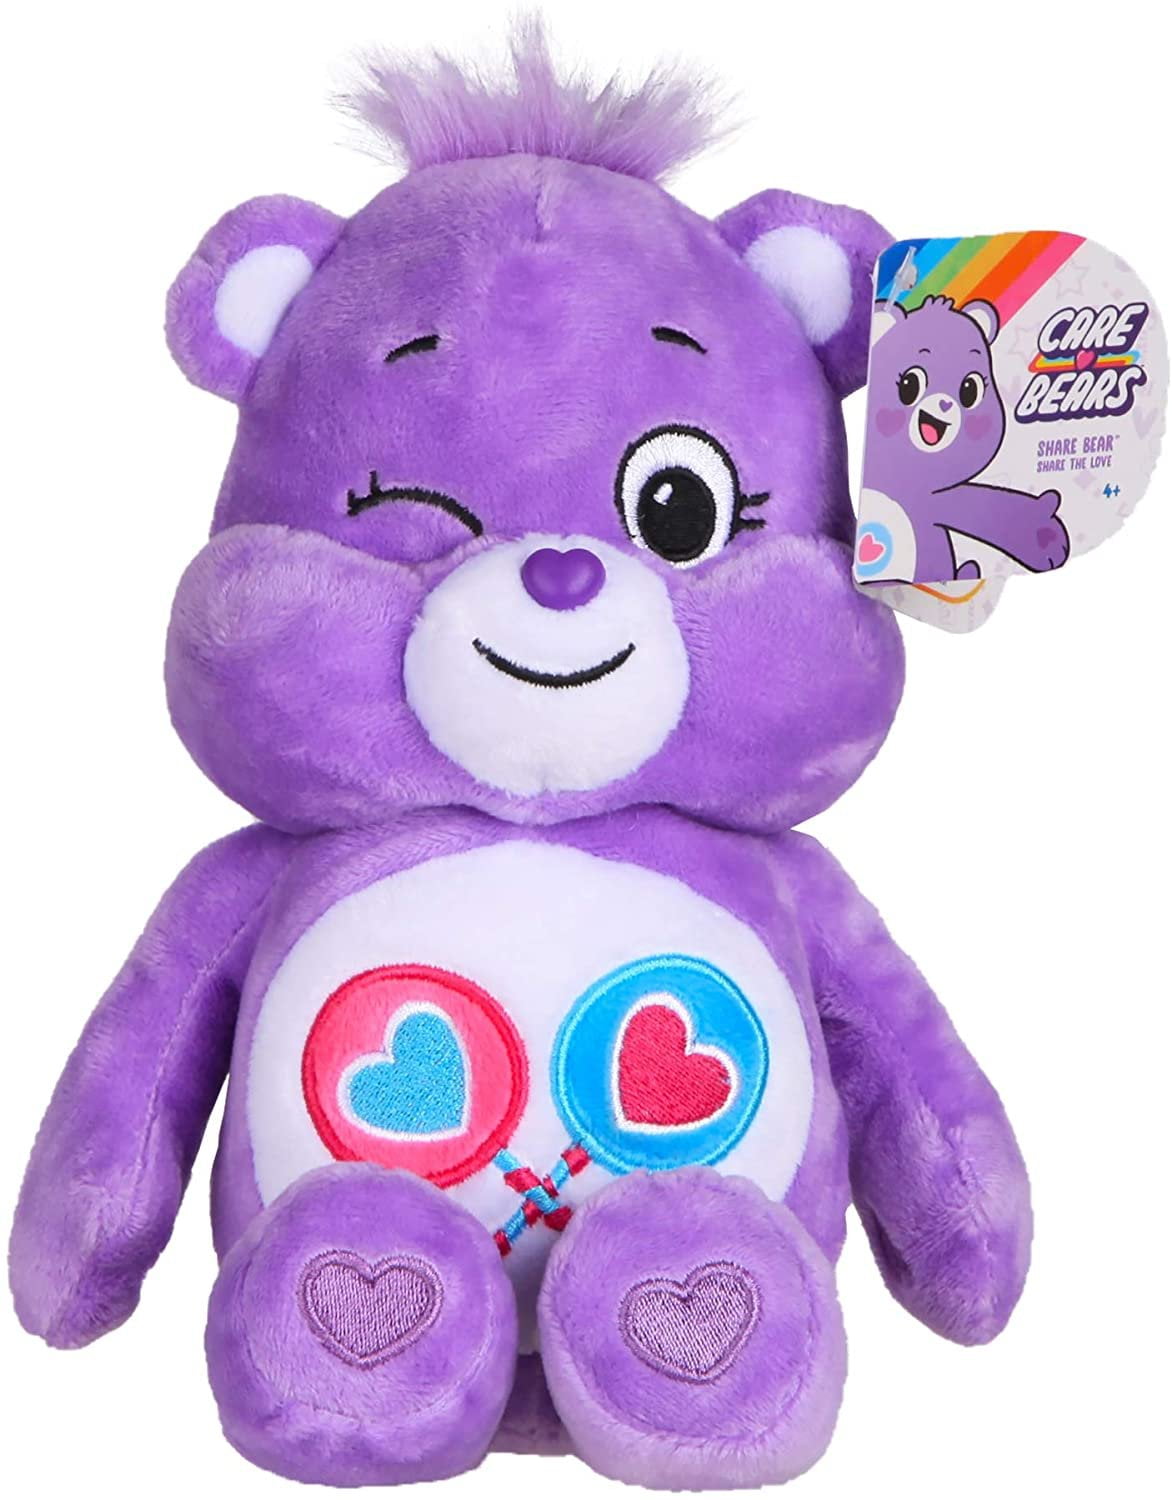 New 2020 Care Bears 14" Share Bear With Coin Walmart Exclusive 